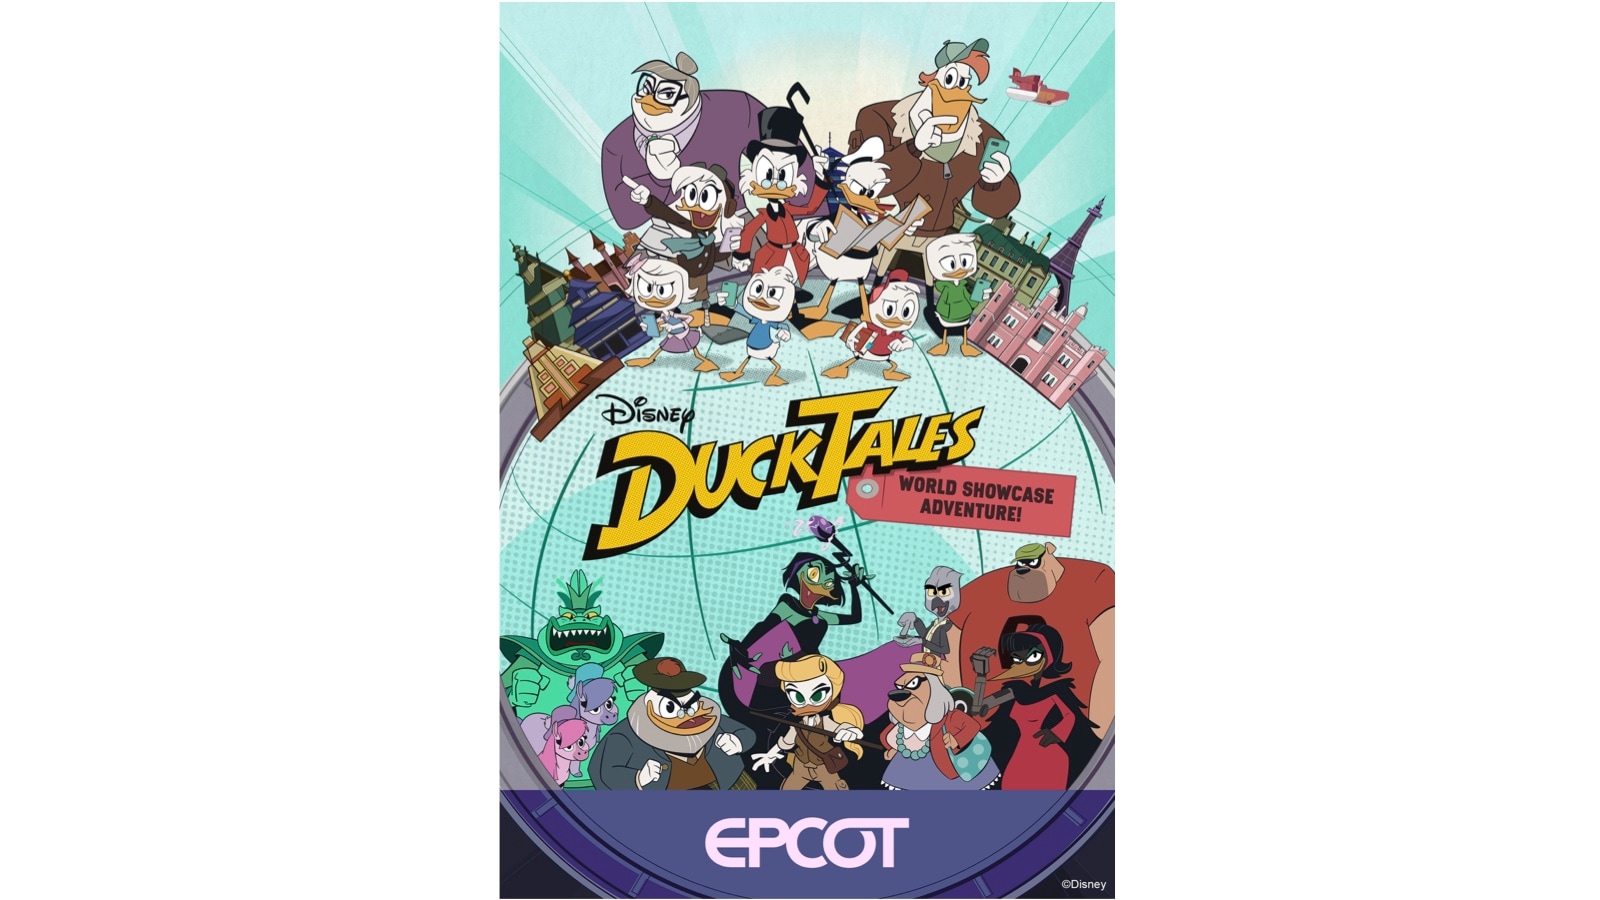 Disney S Ducktales World Showcase Adventure Announced For Play Disney Parks Mobile App At Epcot Disney Parks Blog - roblox ducktales event games